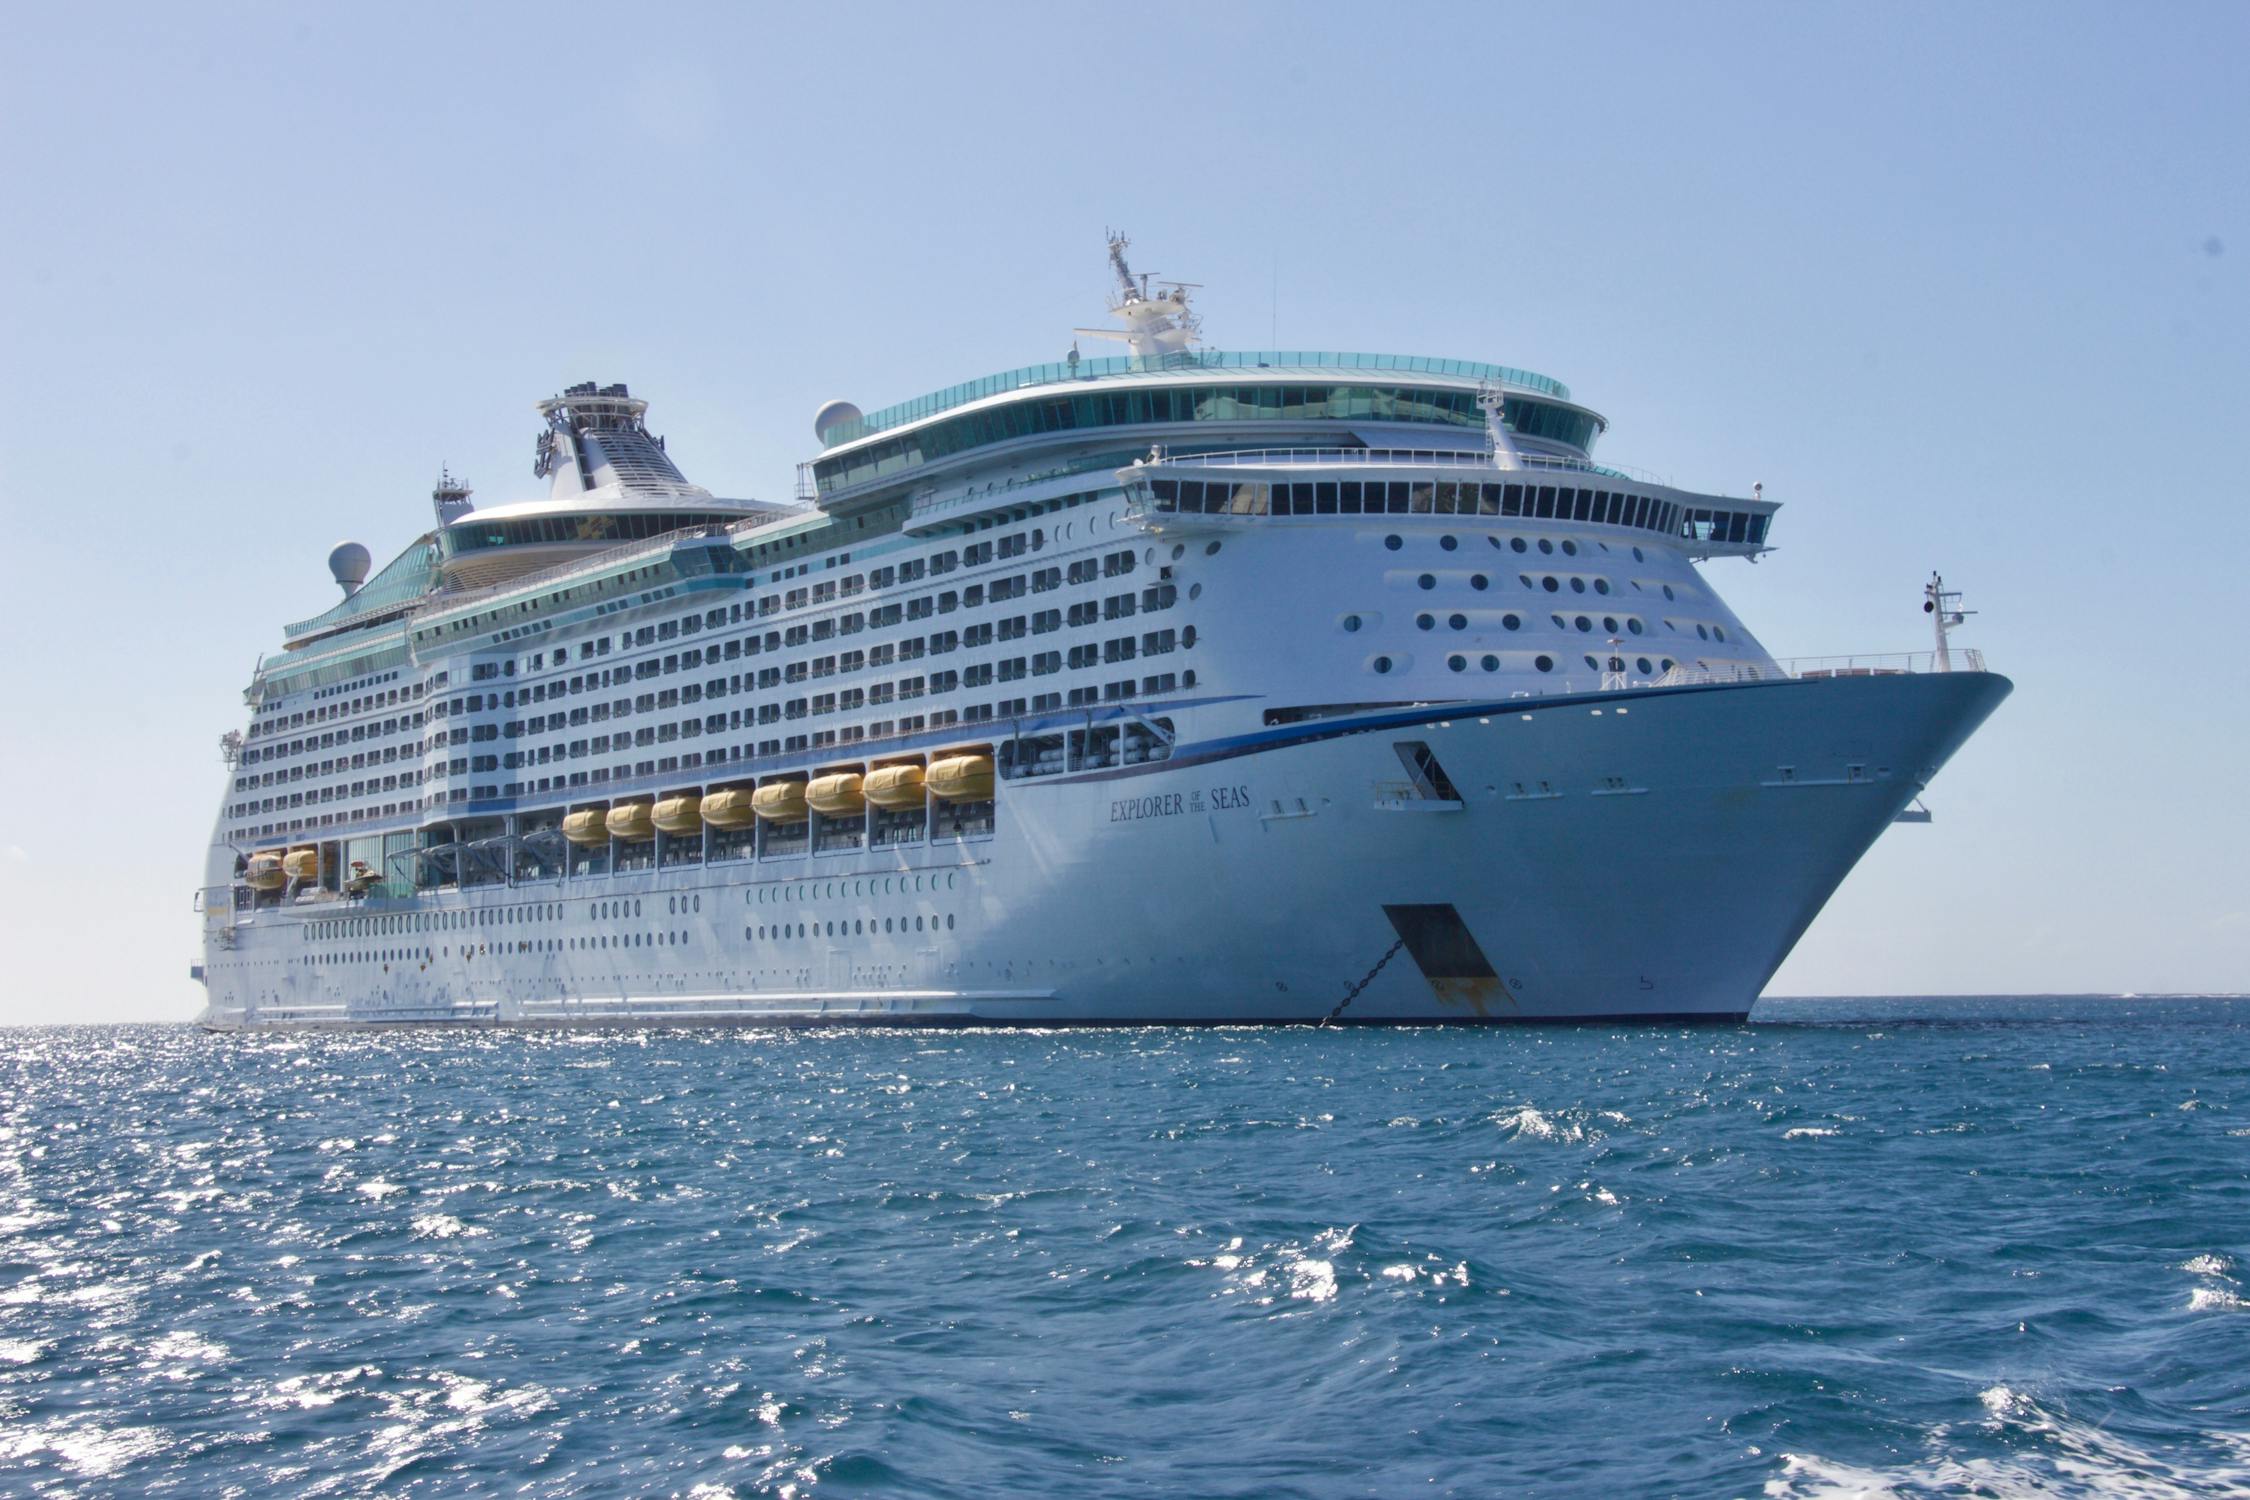 Cruises - A Great Way to Holiday